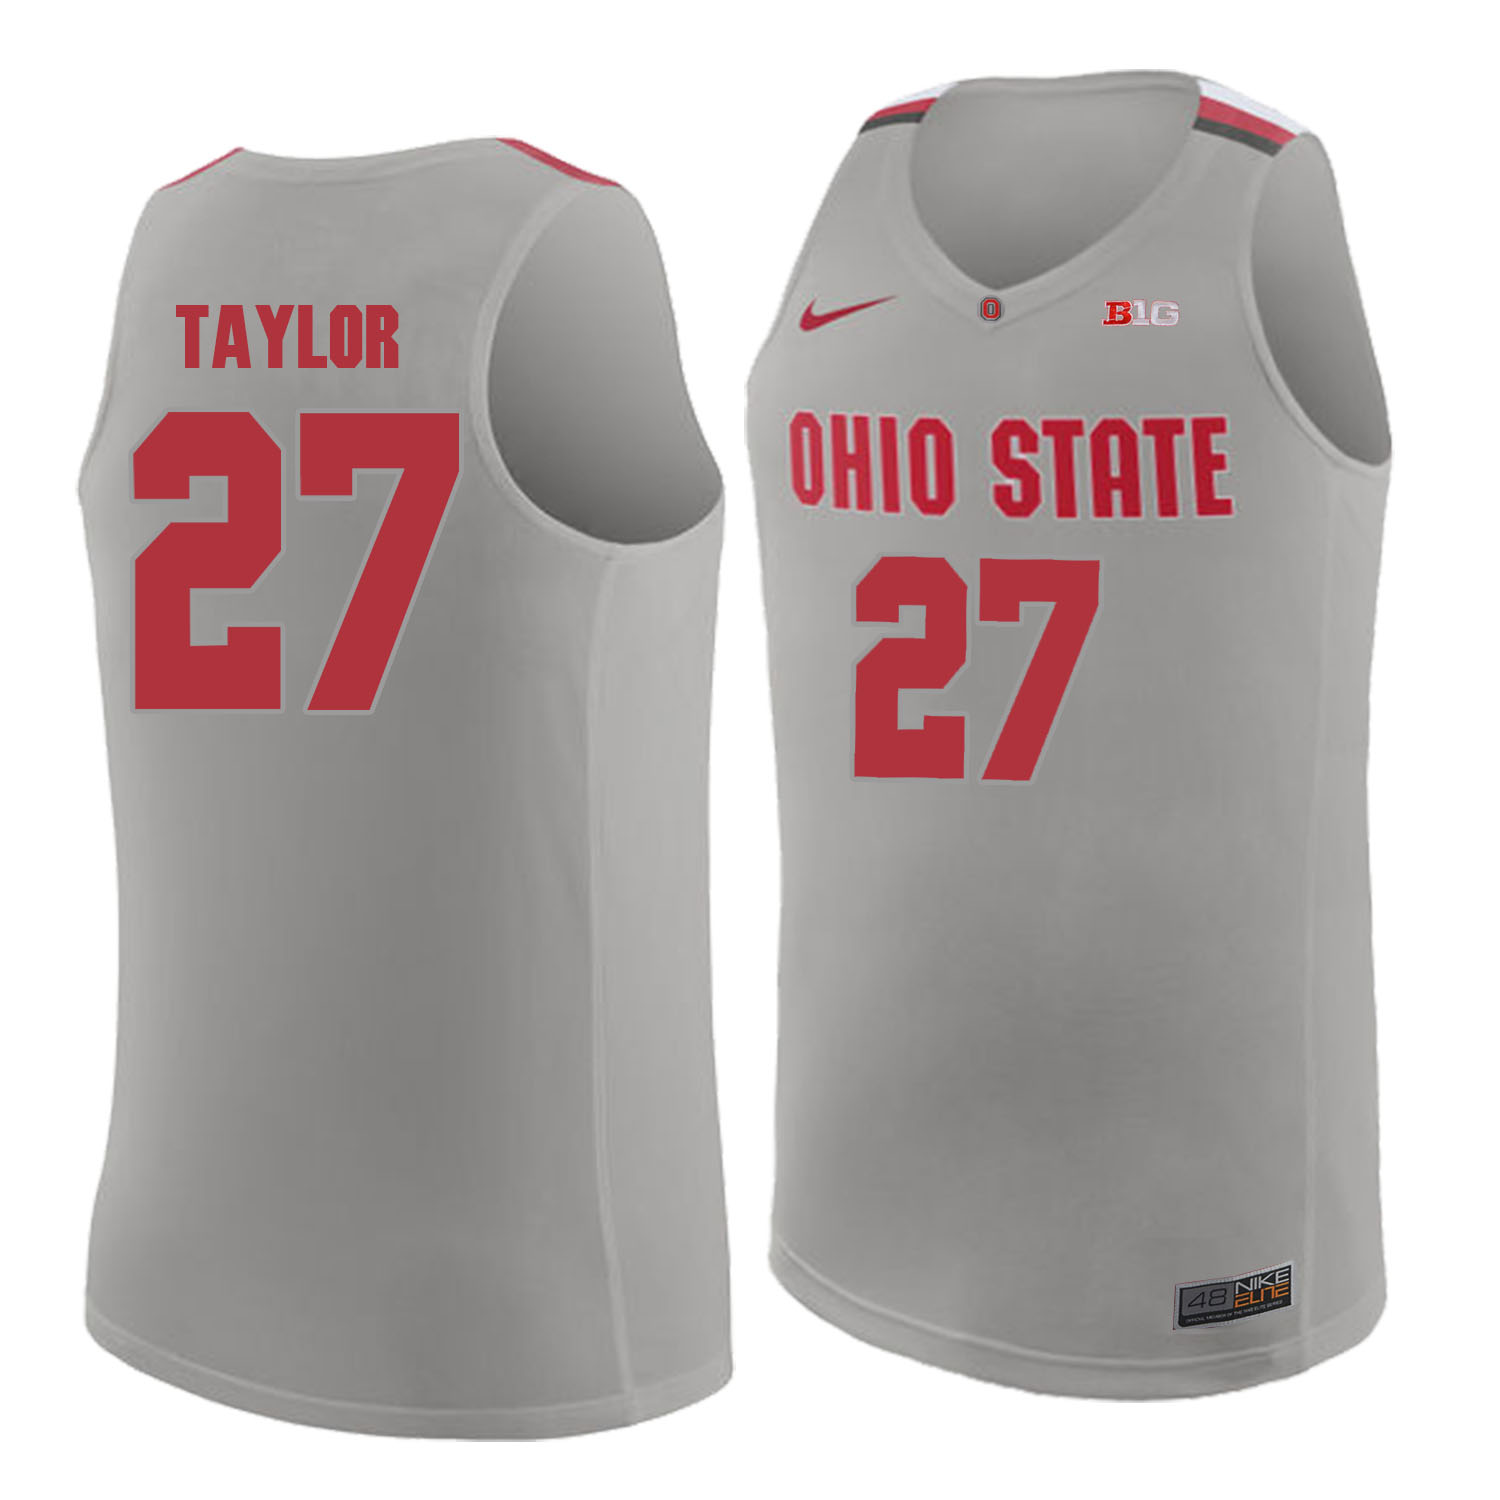 Ohio State Buckeyes 27 Fred Taylor Gray College Basketball Jersey